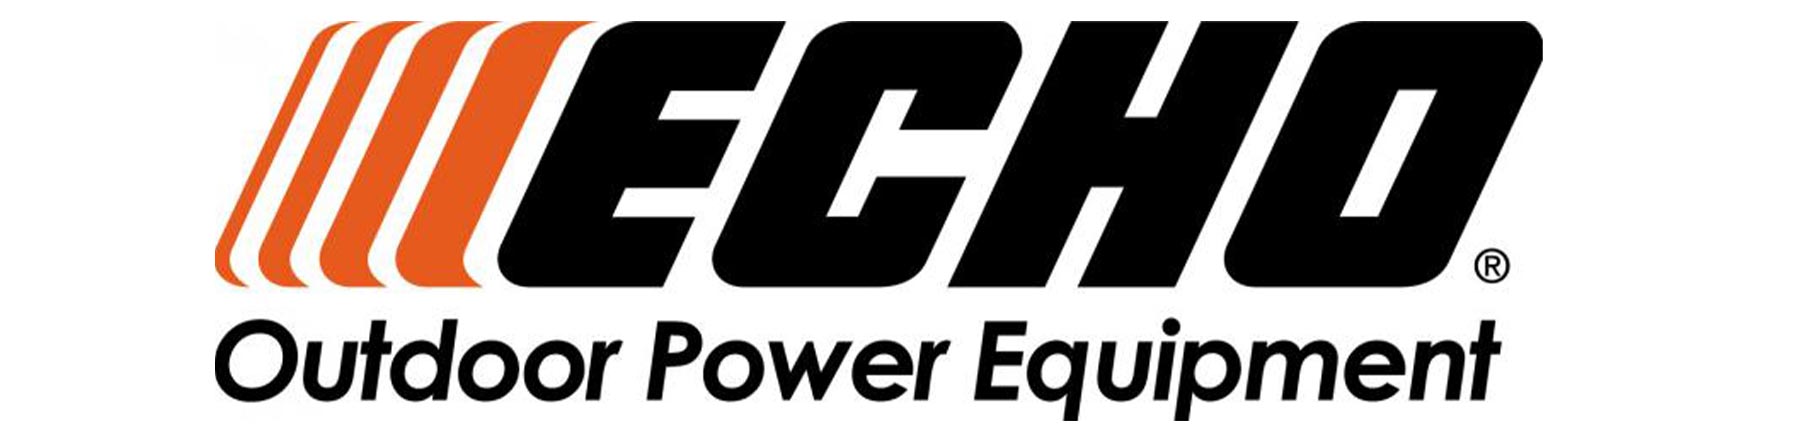 ECHO Outdoor Power Equipment Logo | Echo Outdoor Power Equipment Products for Sale at Four Star Supply